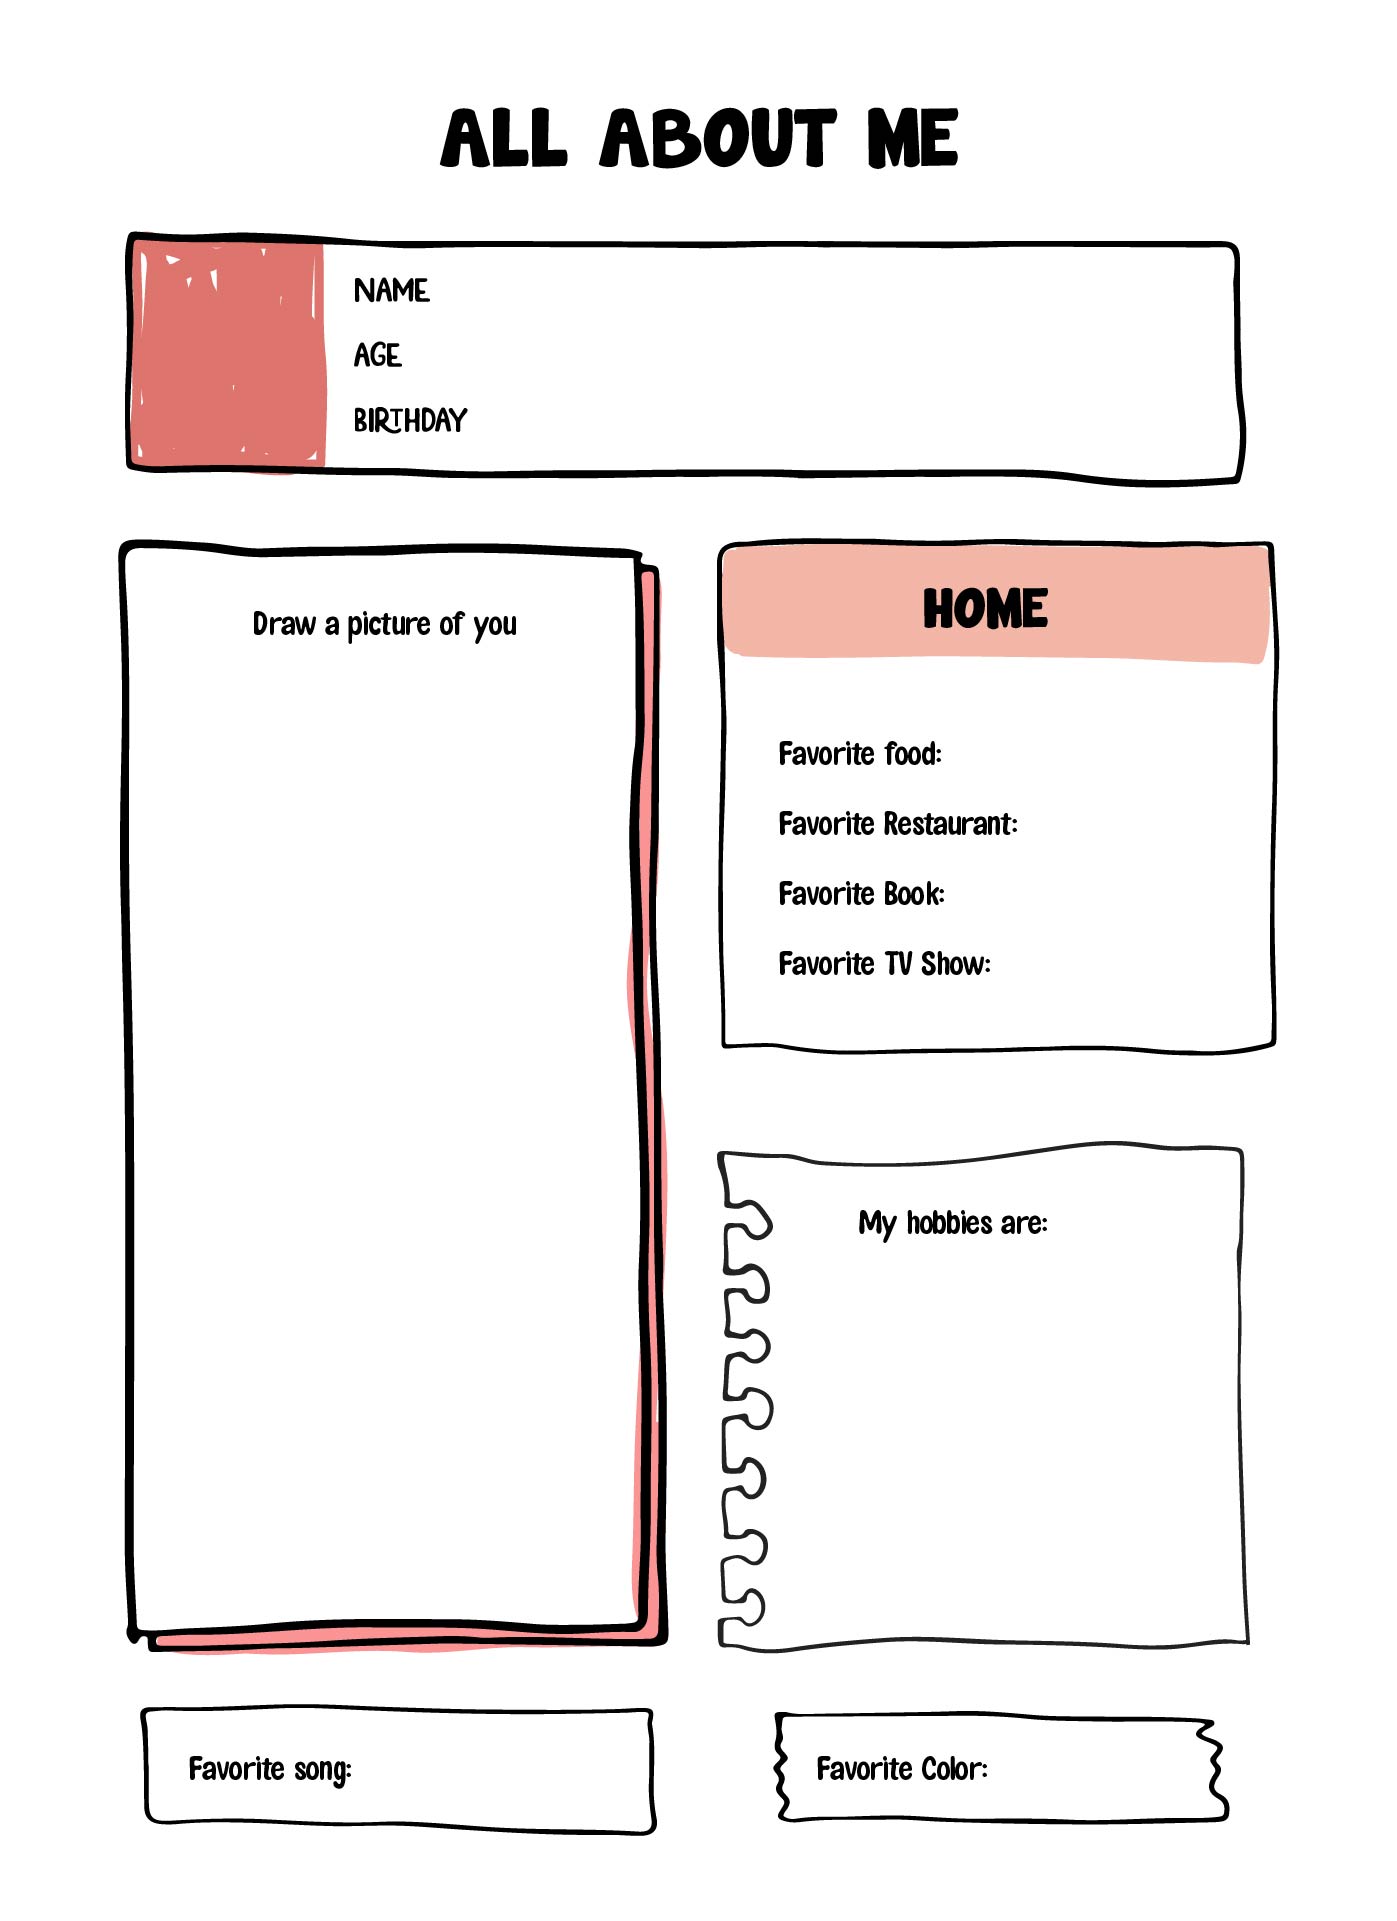 Preschool All About Me Worksheets Printables